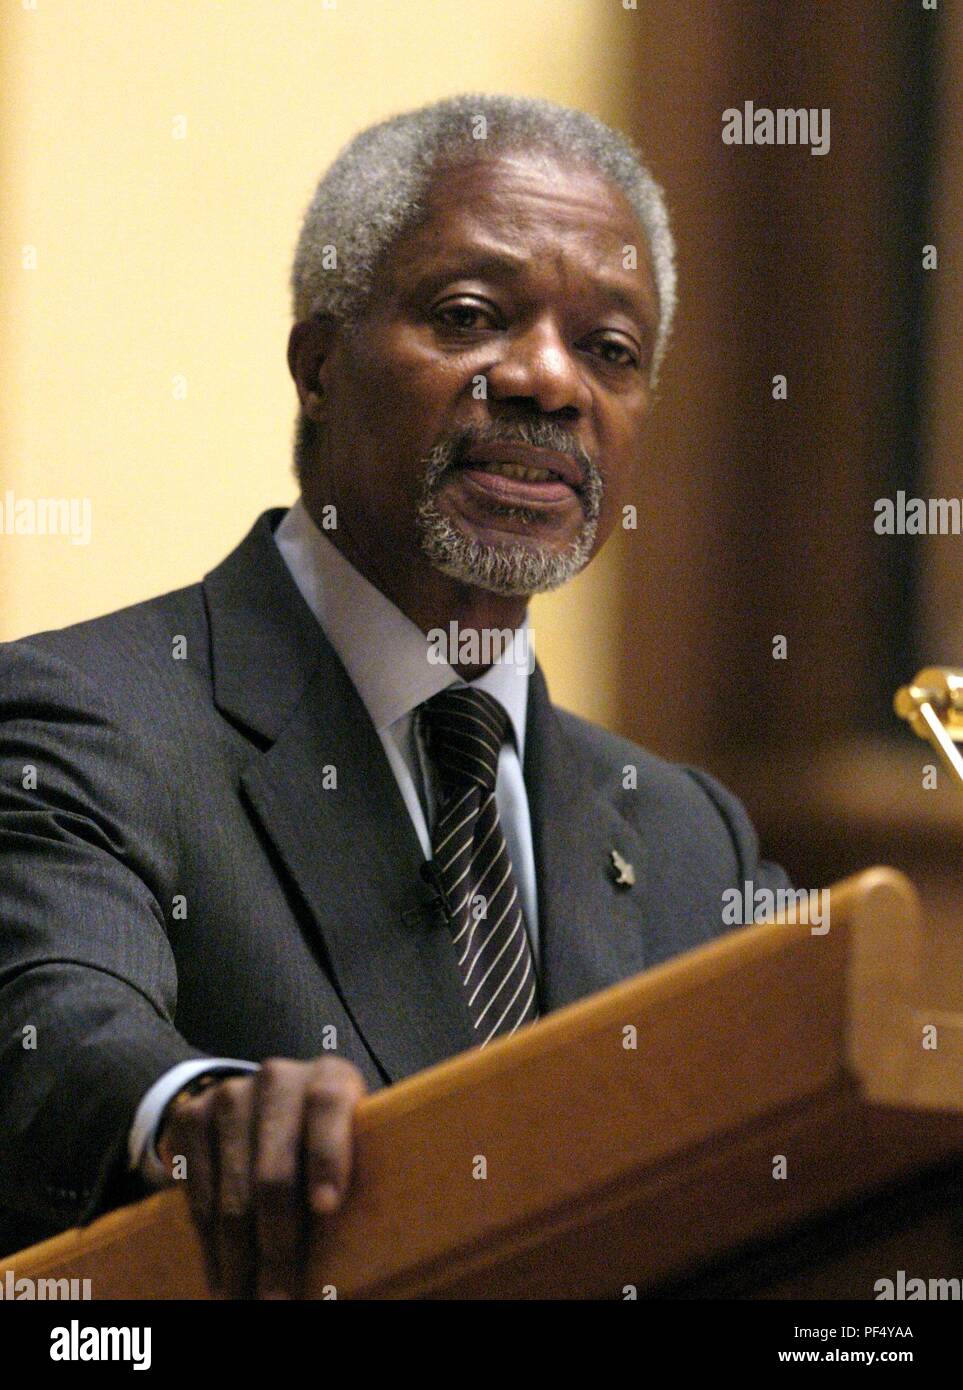 Tuebingen, Germany. 12th Dec, 2003. (dpa) - UN Secretary-General Kofi Annan delivers a speech at the Eberhard-Karls-University in Tuebingen, Germany, 12 December 2003. Peace Nobel Price laureate Annan called for more tolerance, solidarity and compassion speaking to hundreds of invited guests at the university. | usage worldwide Credit: dpa/Alamy Live News Stock Photo